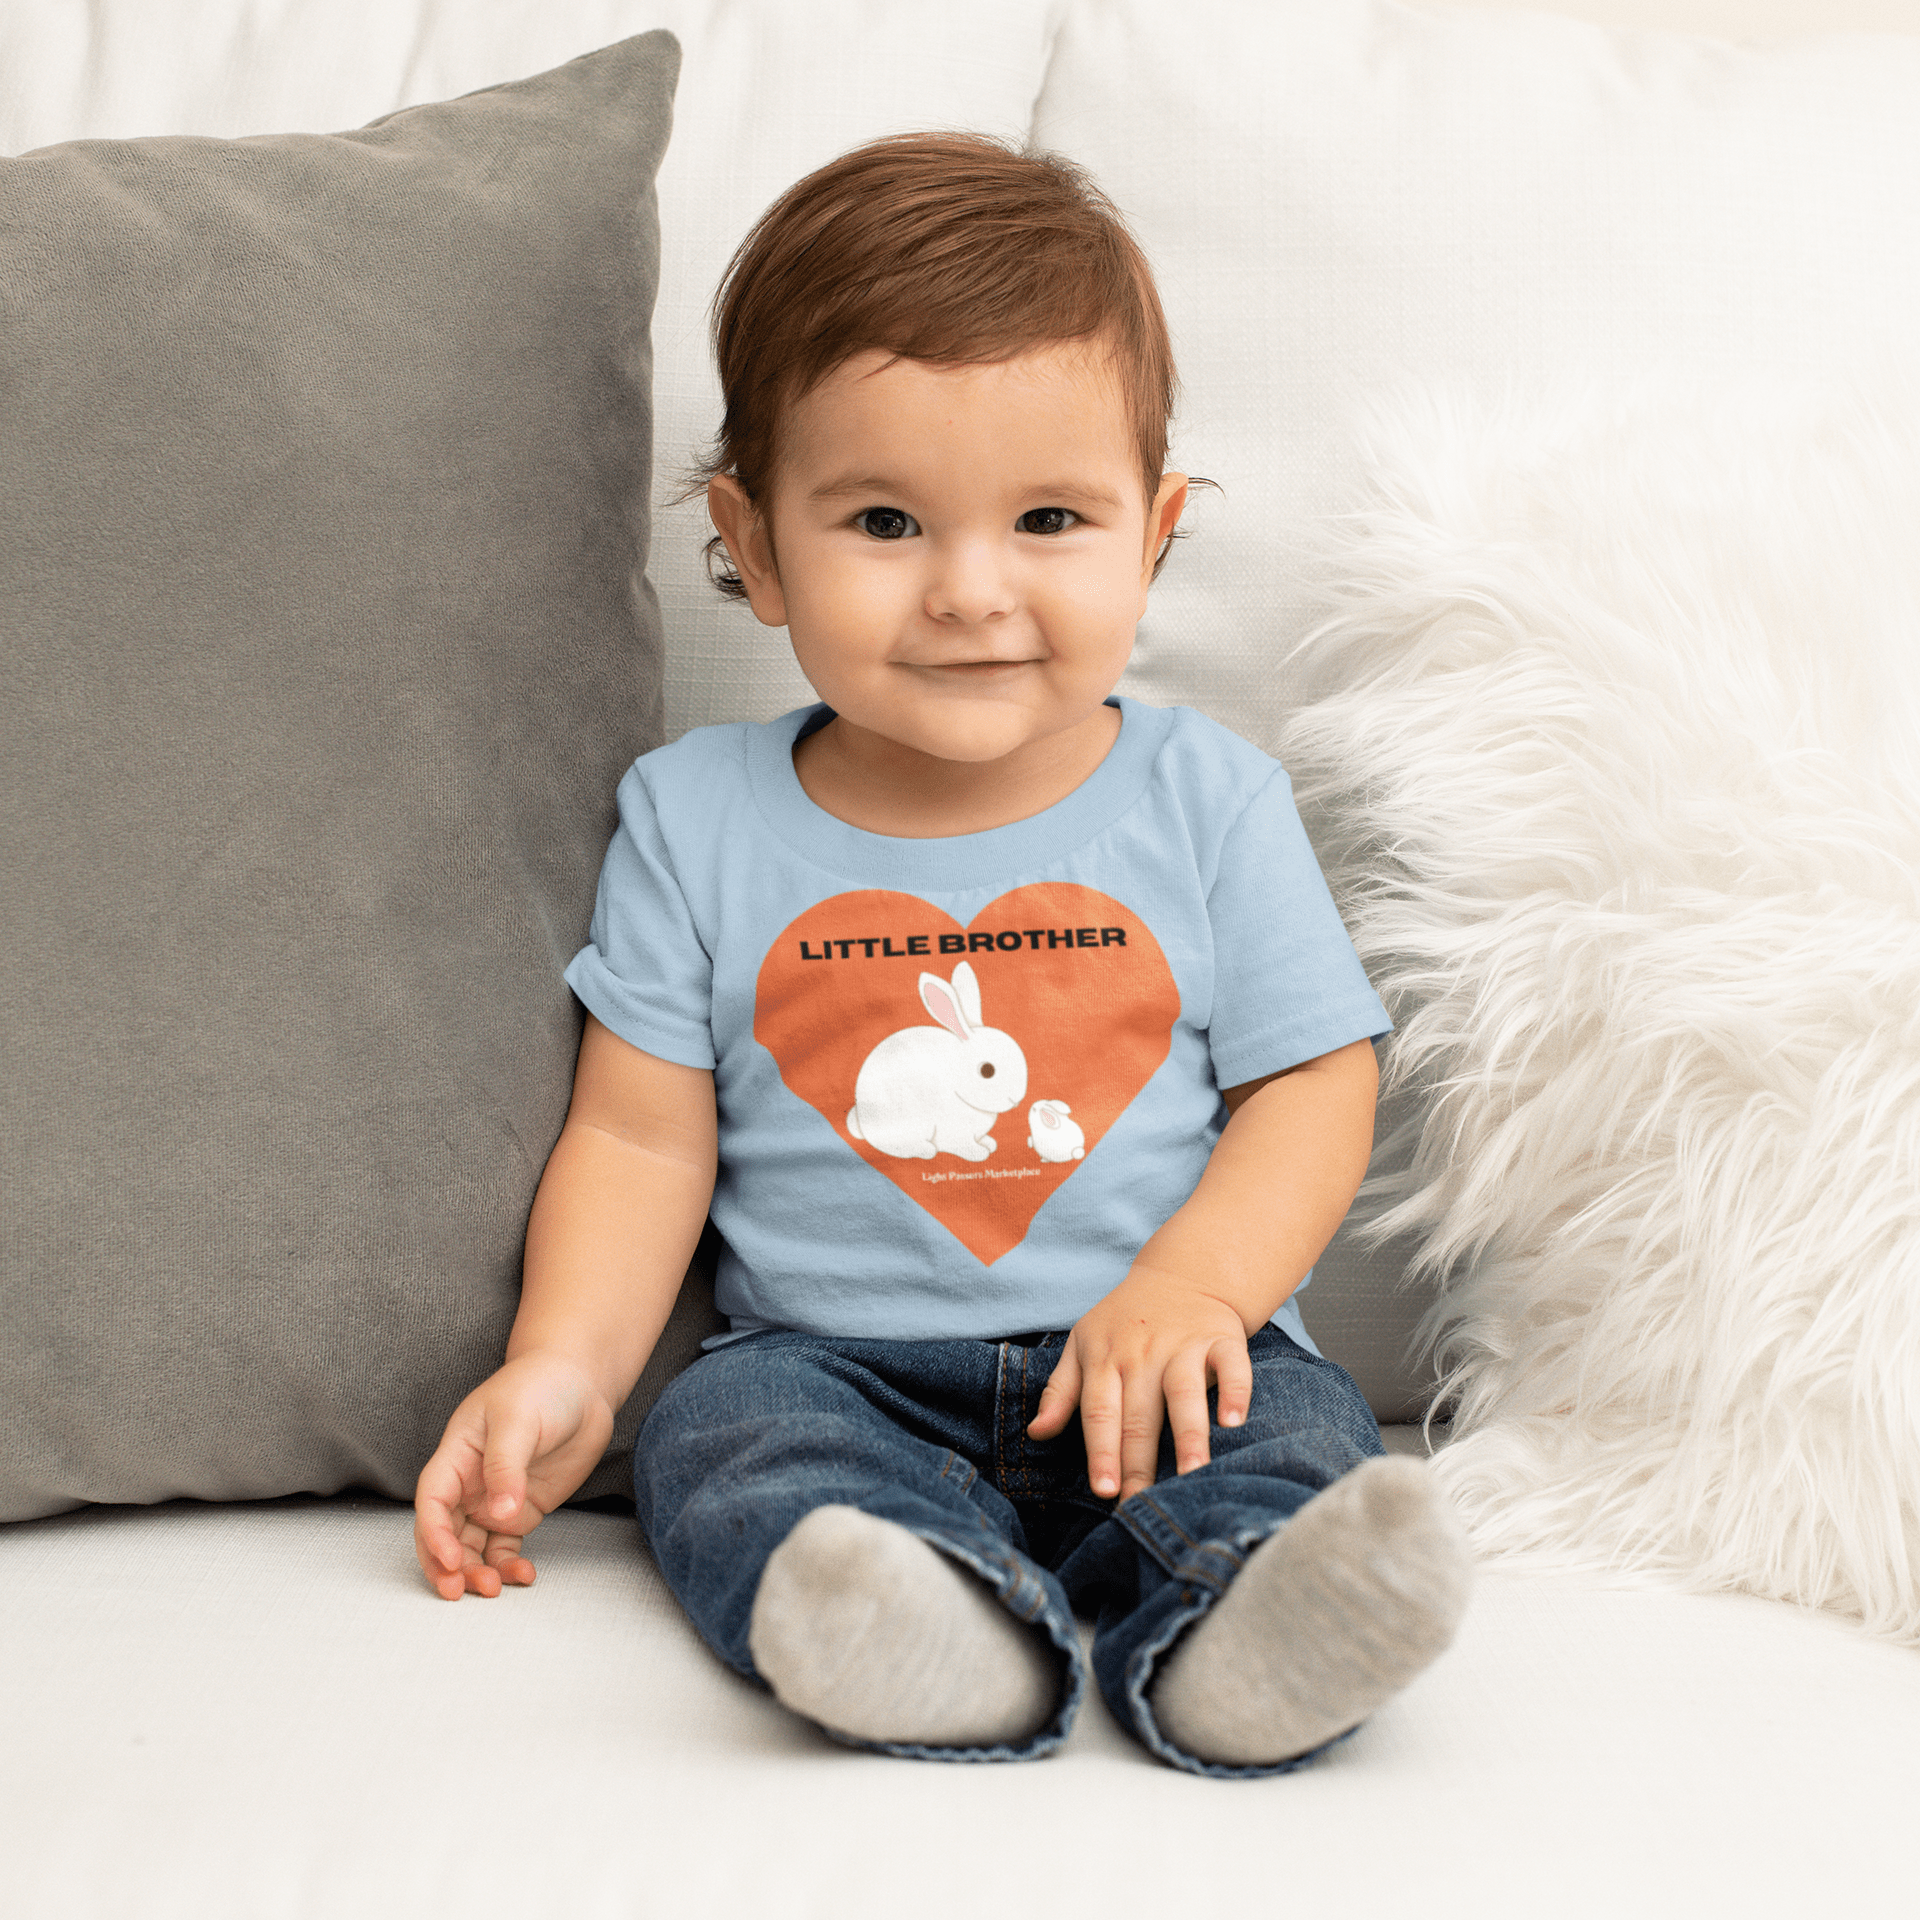 A baby sitting on a couch wearing a Little Brother Baby T-shirt, showcasing comfort and durability with ribbed knitting and taped shoulders for a breezy fit.